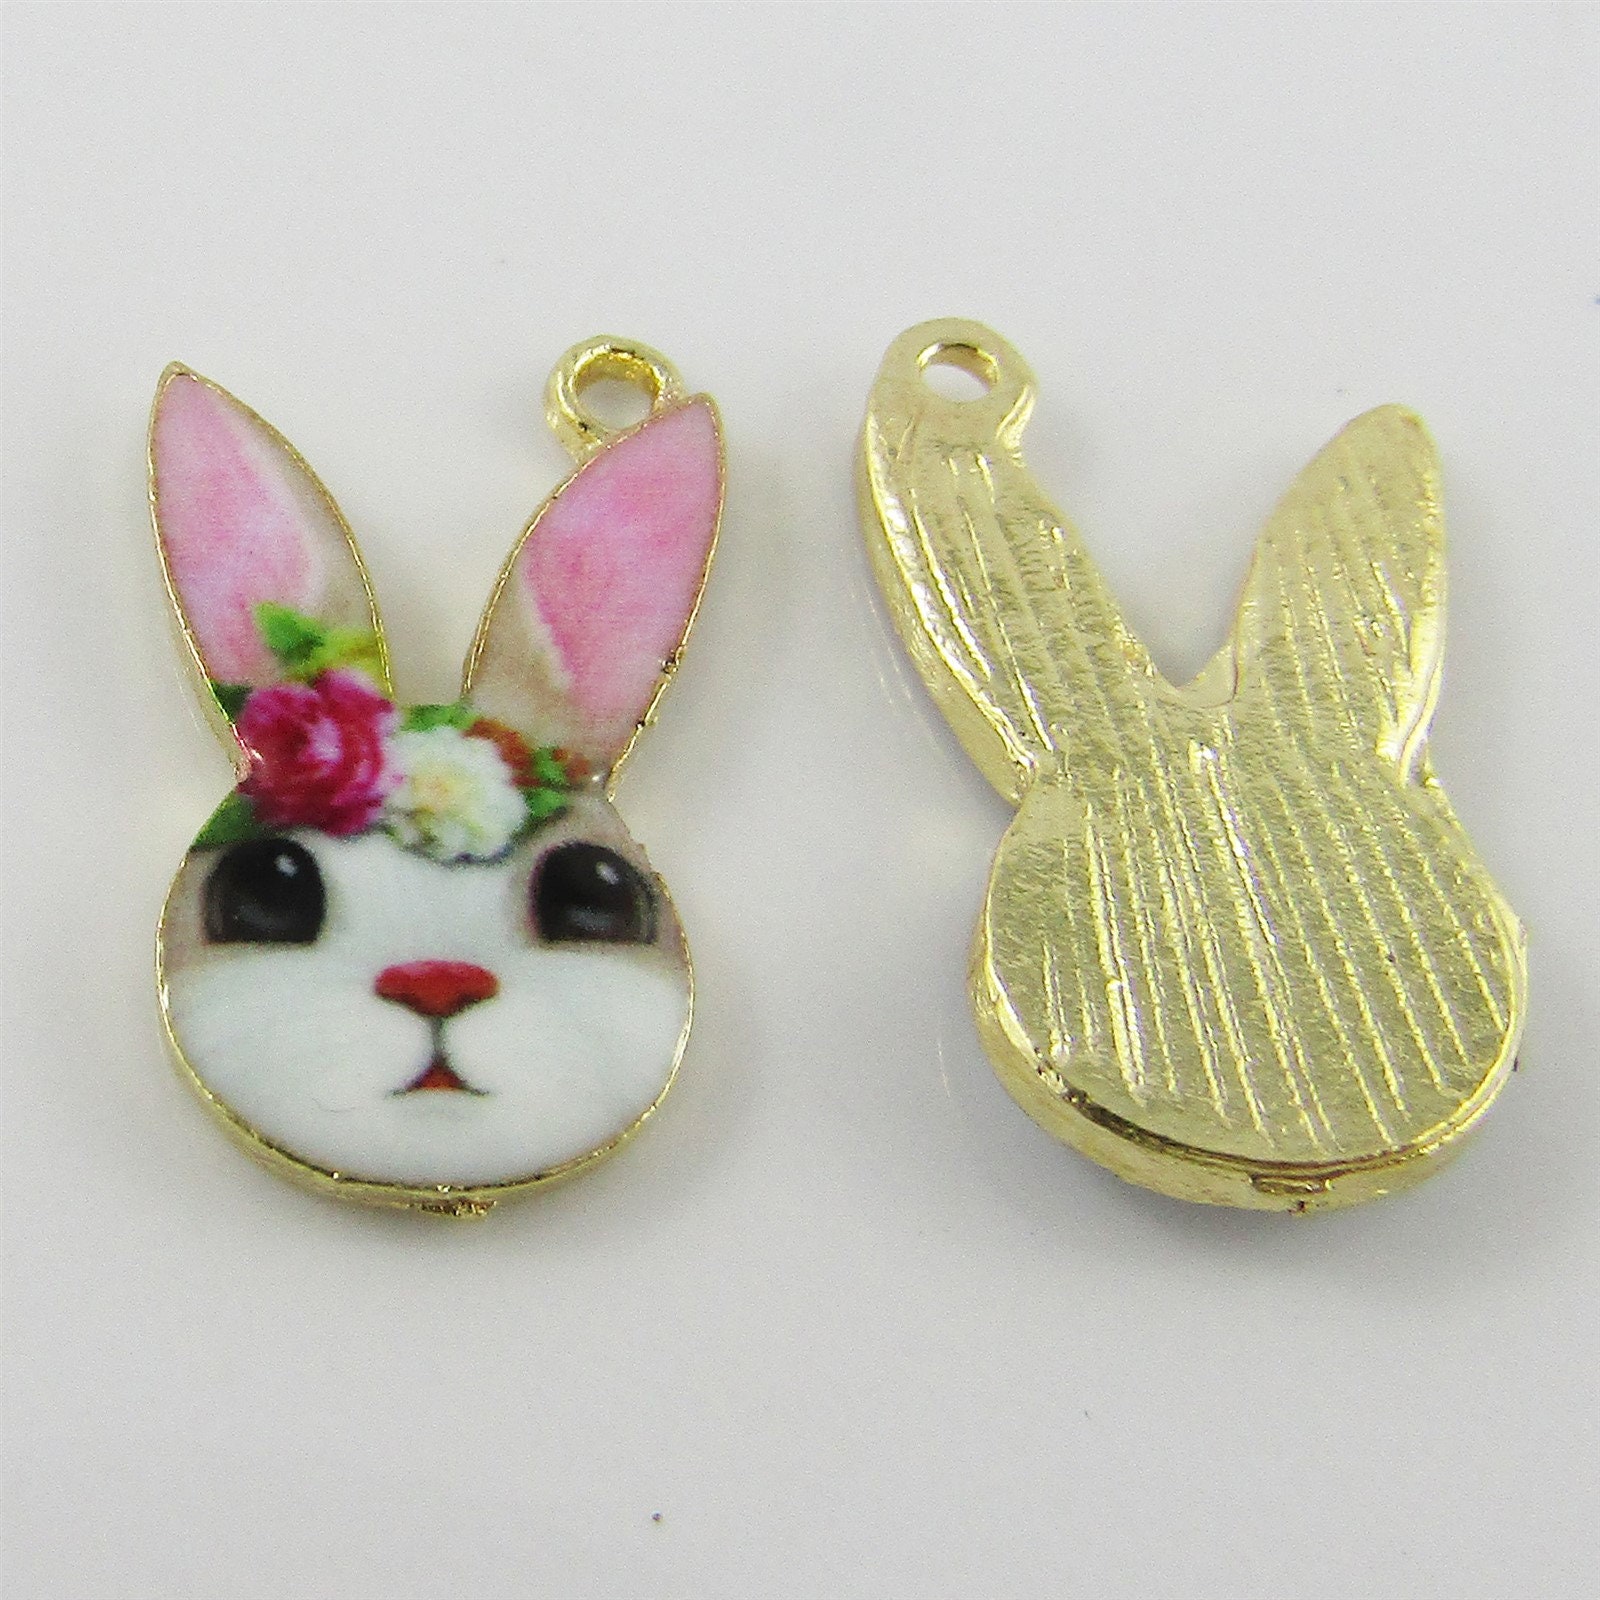 LUOZZY 40 Pcs Easter Rabbit Charms for Jewelry Making Easter Carrot Charms  Easter DIY Charms for Earrings Necklace Bracelet